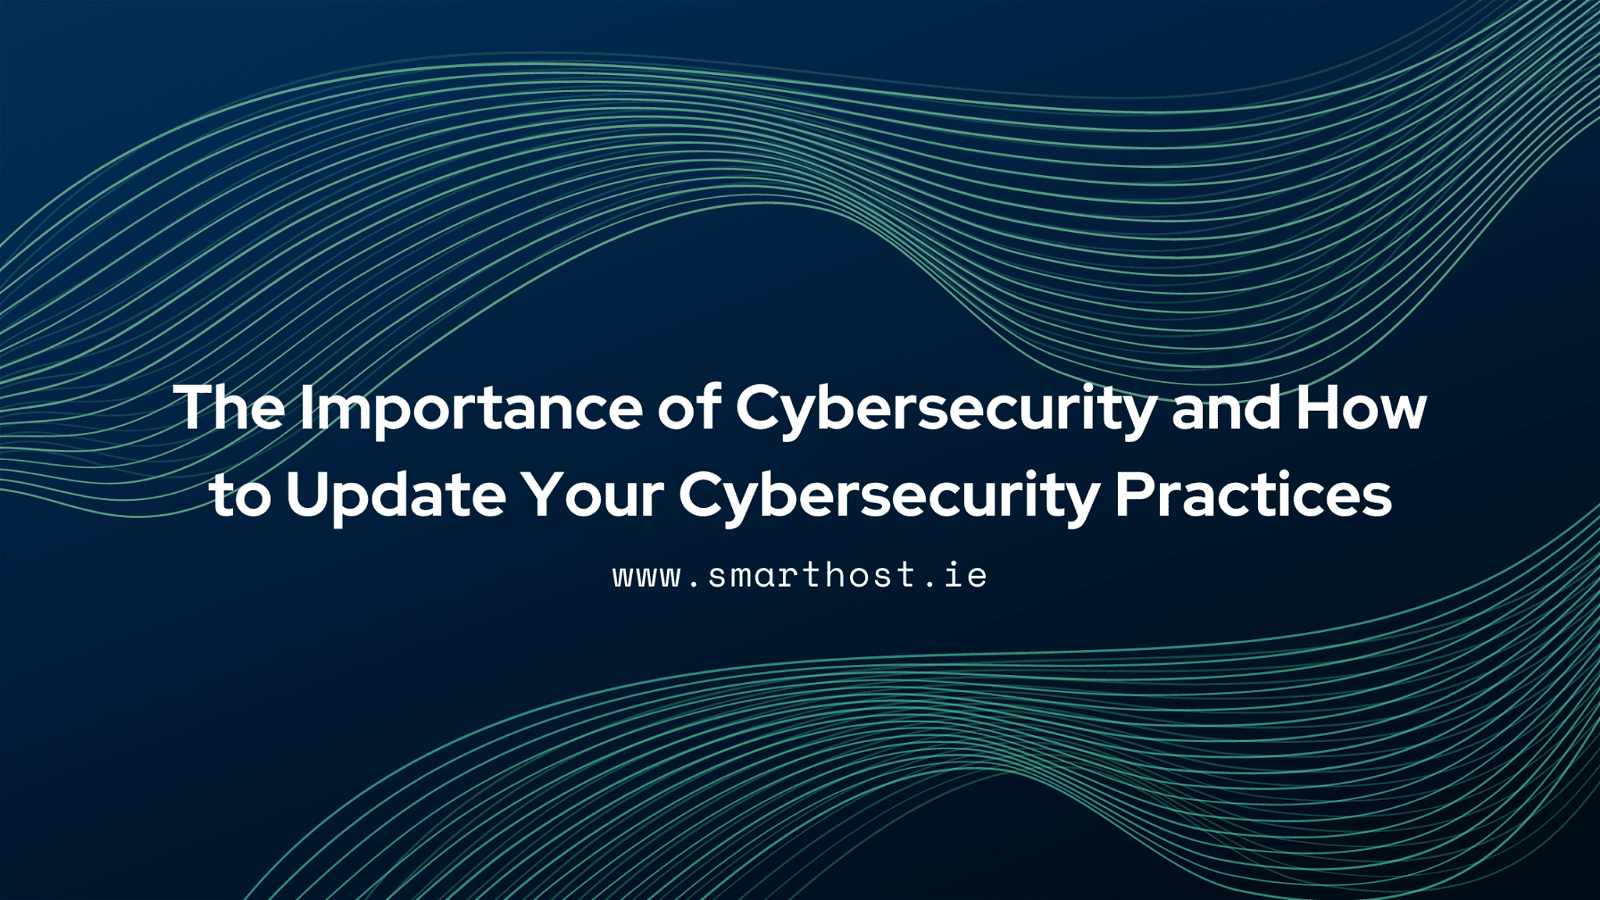 In this image, a person is being informed about the importance of cybersecurity and how to update their cybersecurity practices.